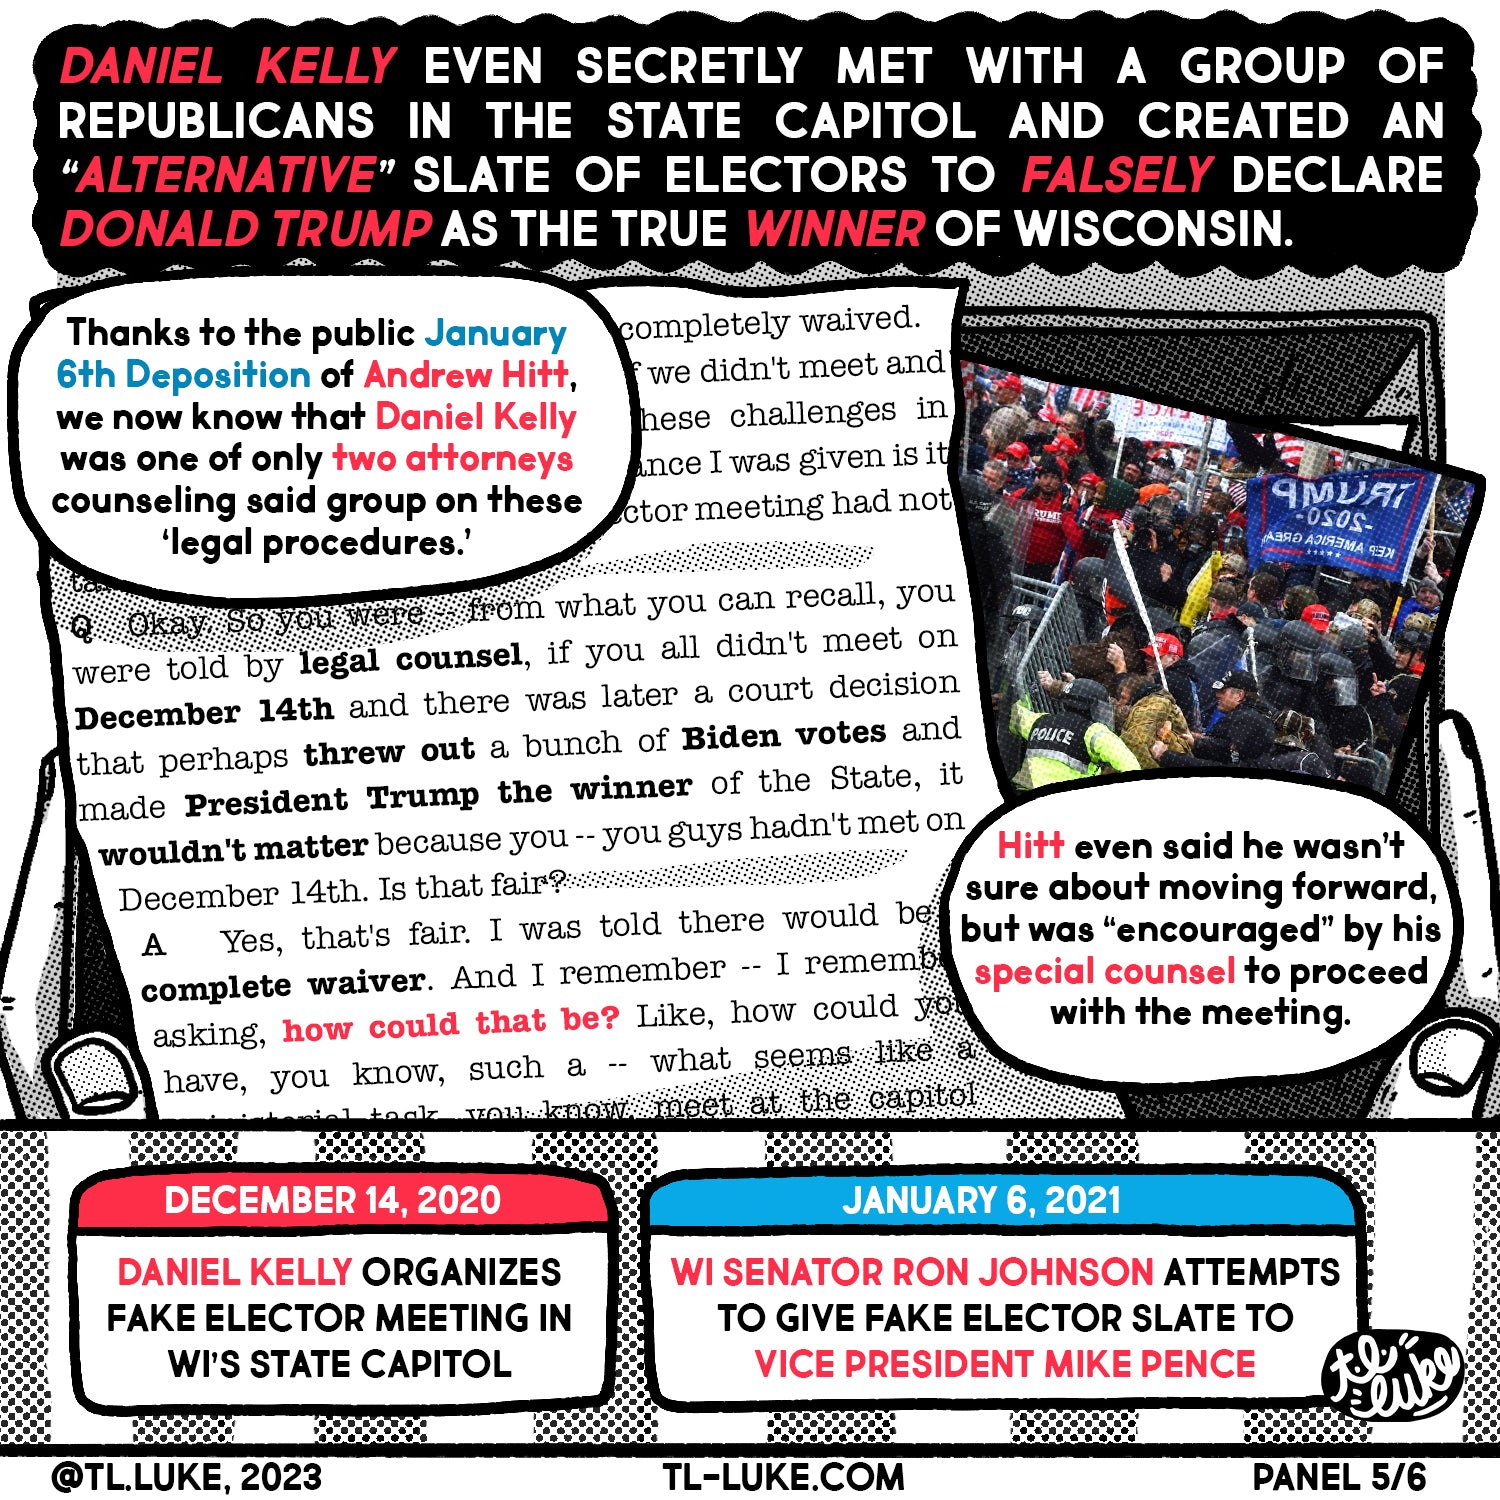 Panel 5 of "Our Path to a Better Wisconsin" comic. This one explains Daniel Kelly's involvement orchestrating the 2020 fake WI elector slate.